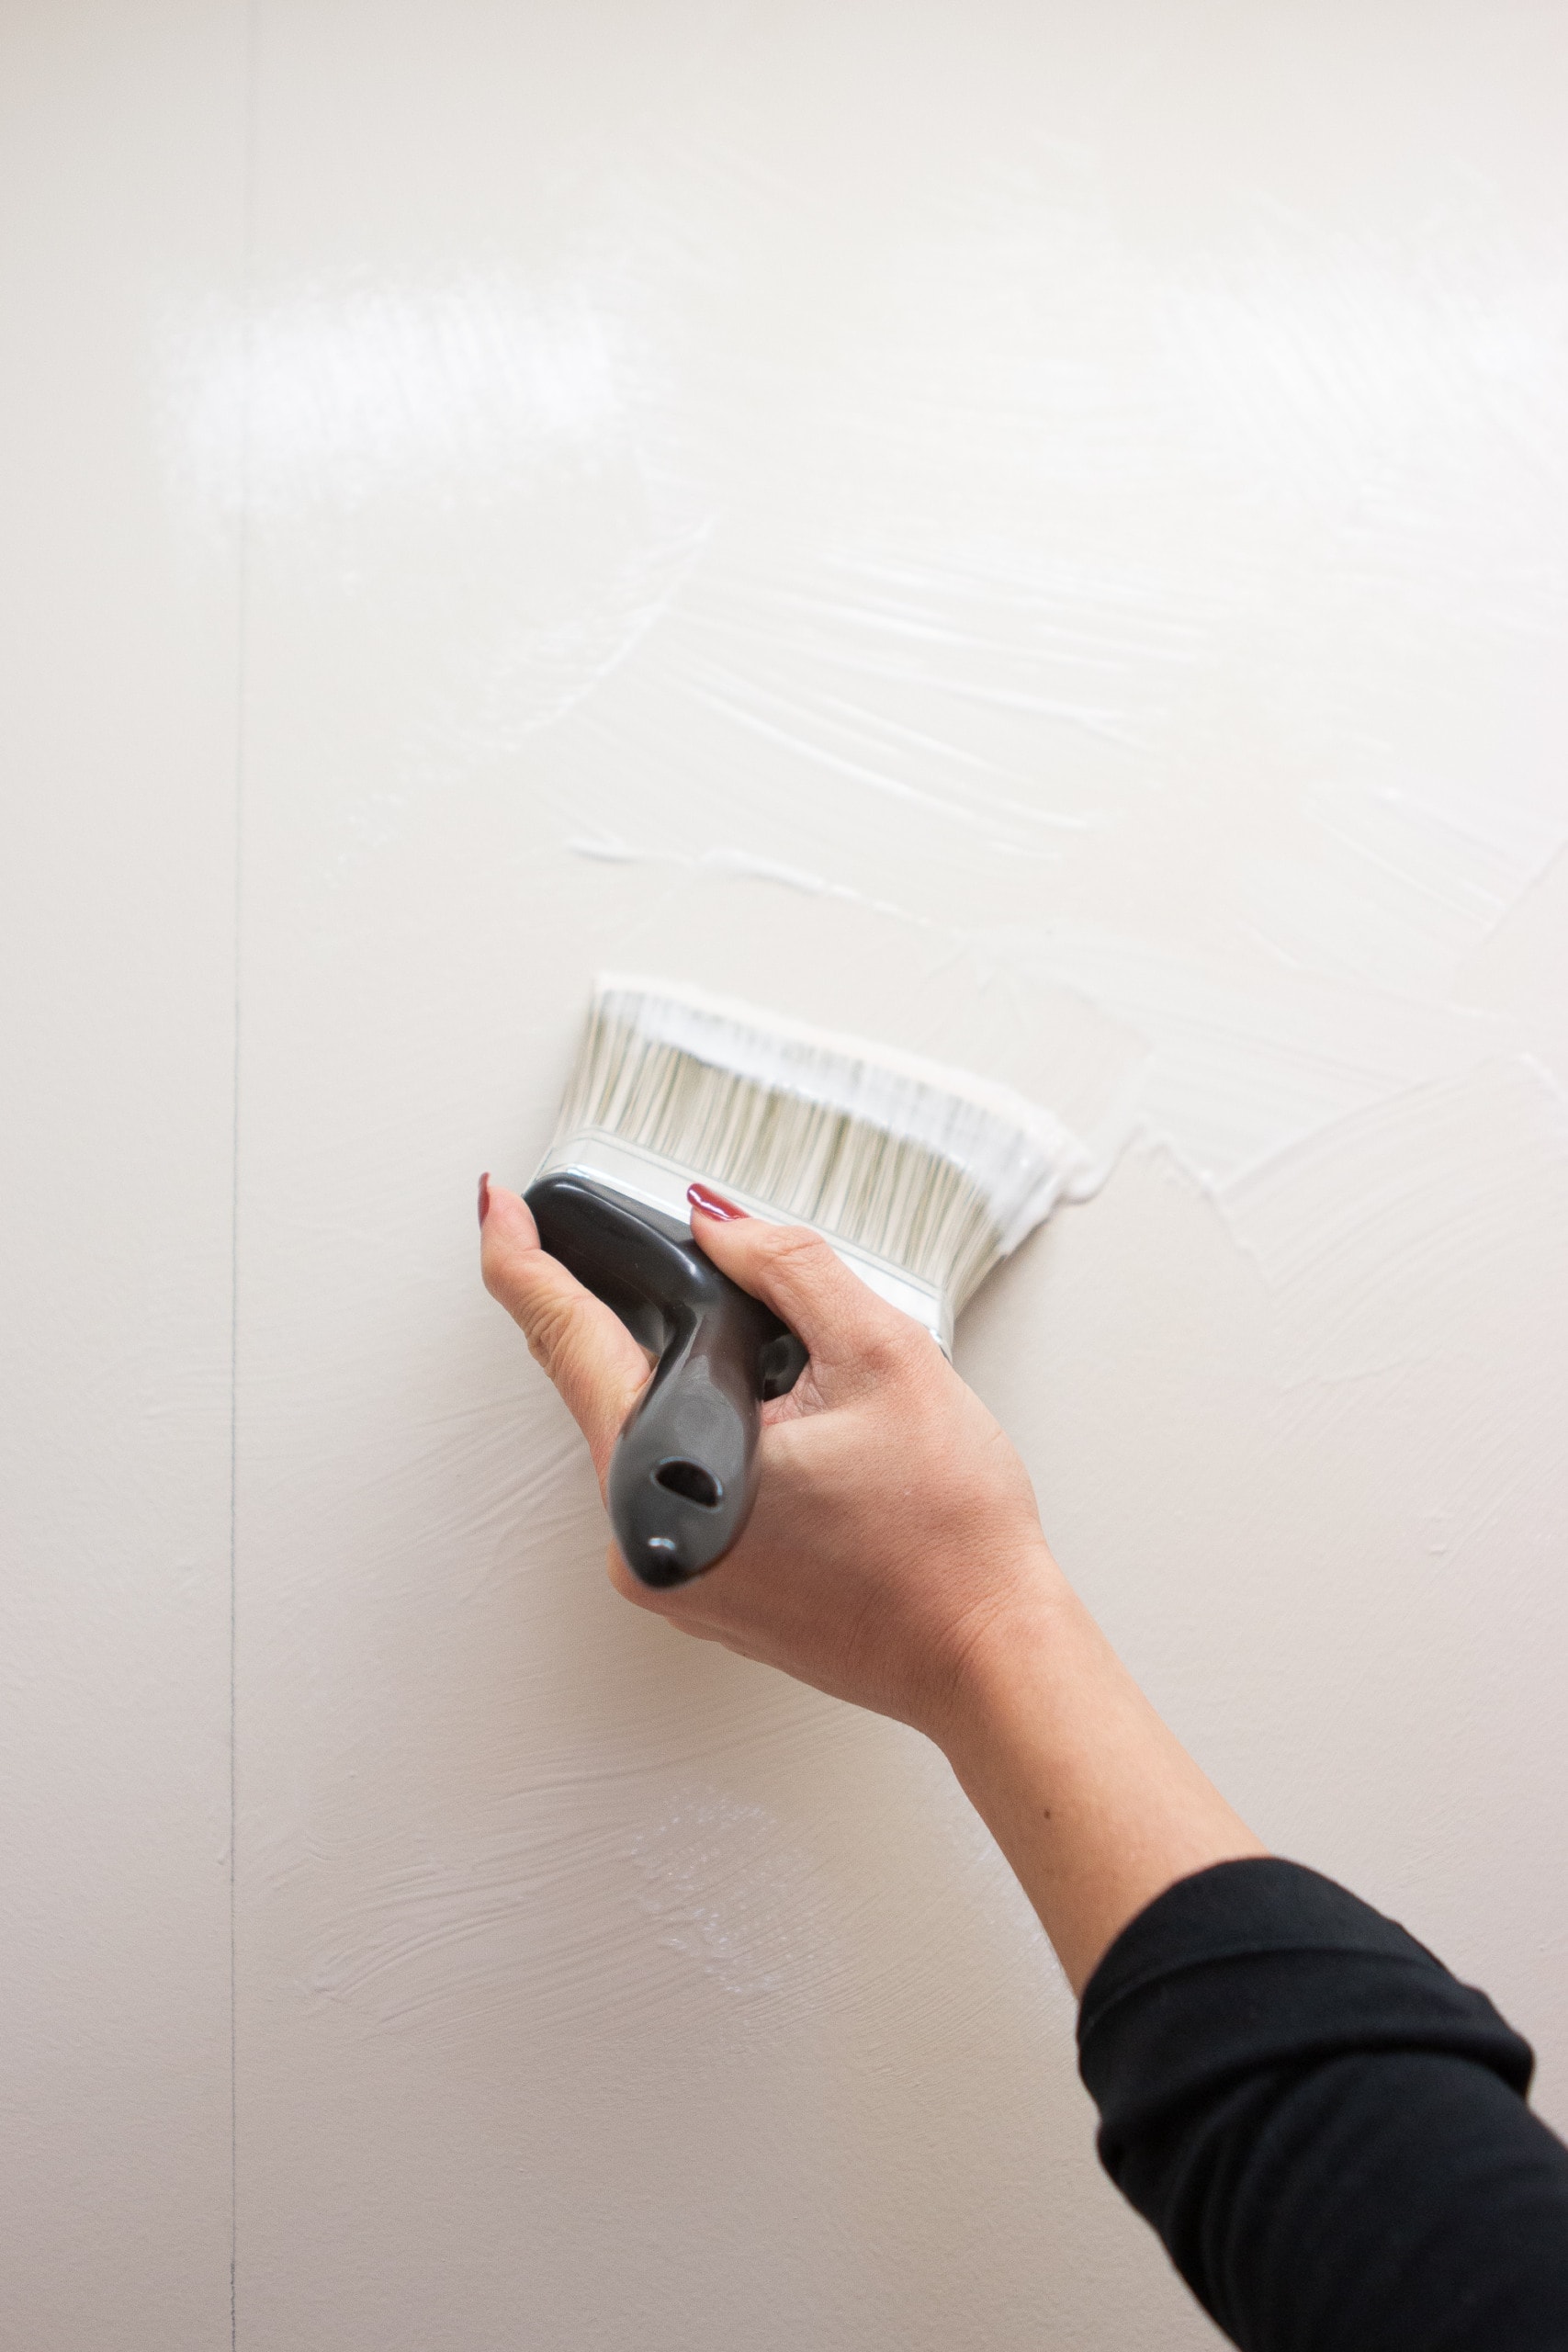 Applying wallpaper paste to the wall